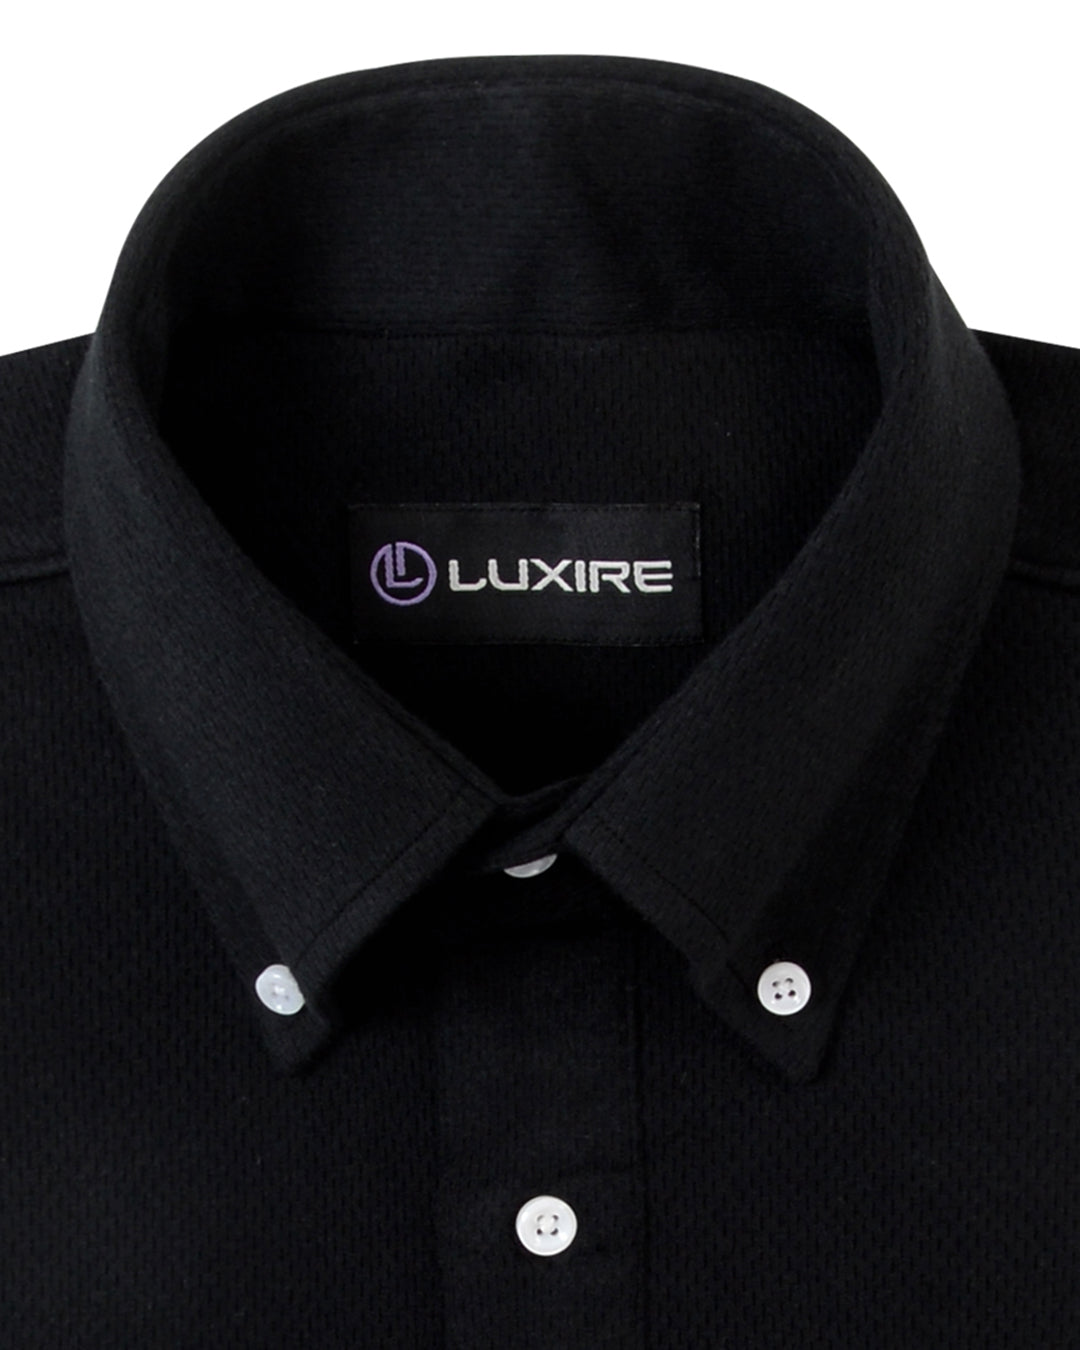 Collar of the custom oxford polo shirt for men by Luxire in midnight black